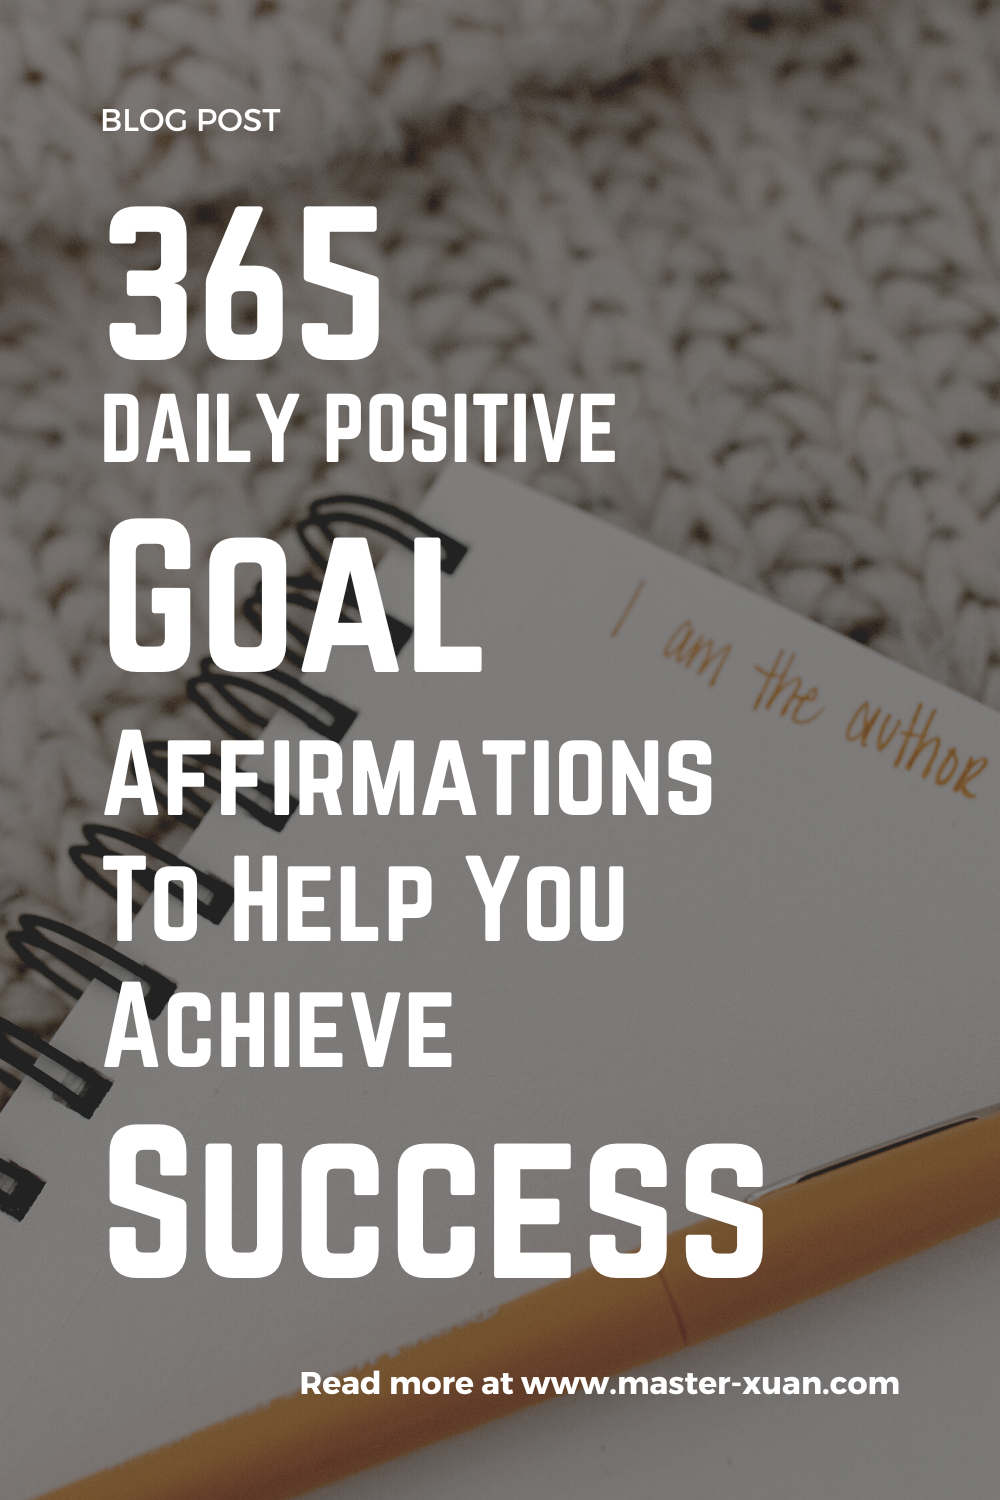 365 Daily Positive Goal Affirmations To Help You Achieve Success